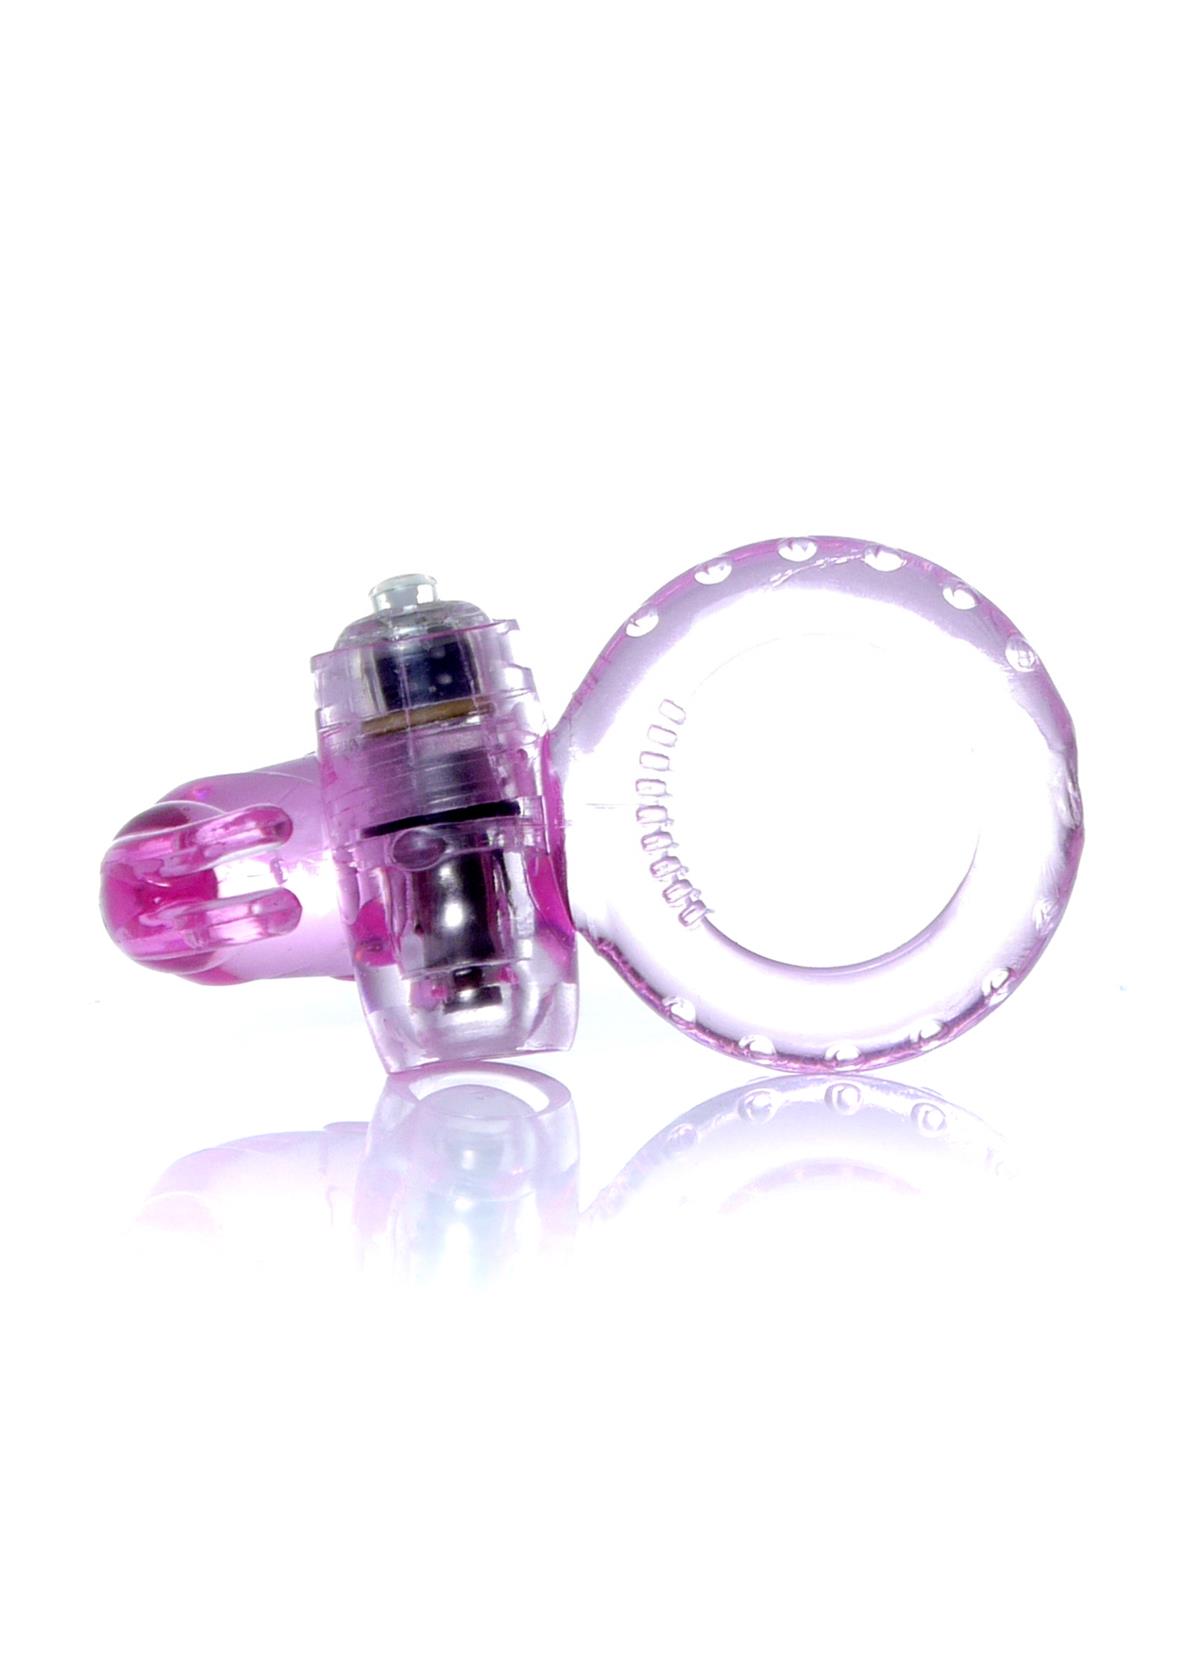 Bossoftoys - 67-00047 - Rabbit Vibrating Cockring  - 7,5 cm - Pink - batteries included - packed in strong blister